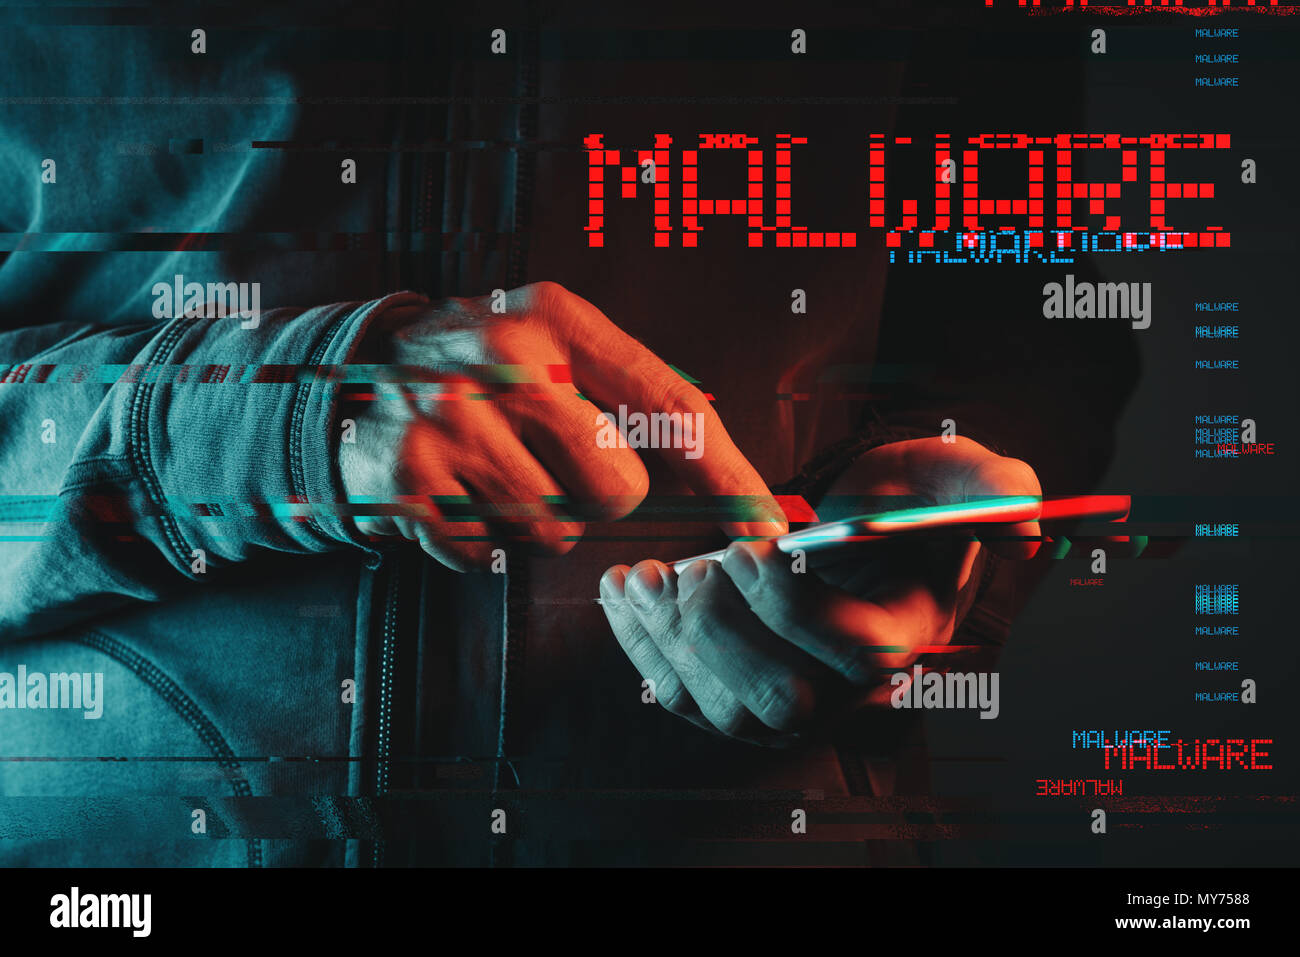 Malware concept with male person using smartphone, low key red and blue lit image and digital glitch effect Stock Photo